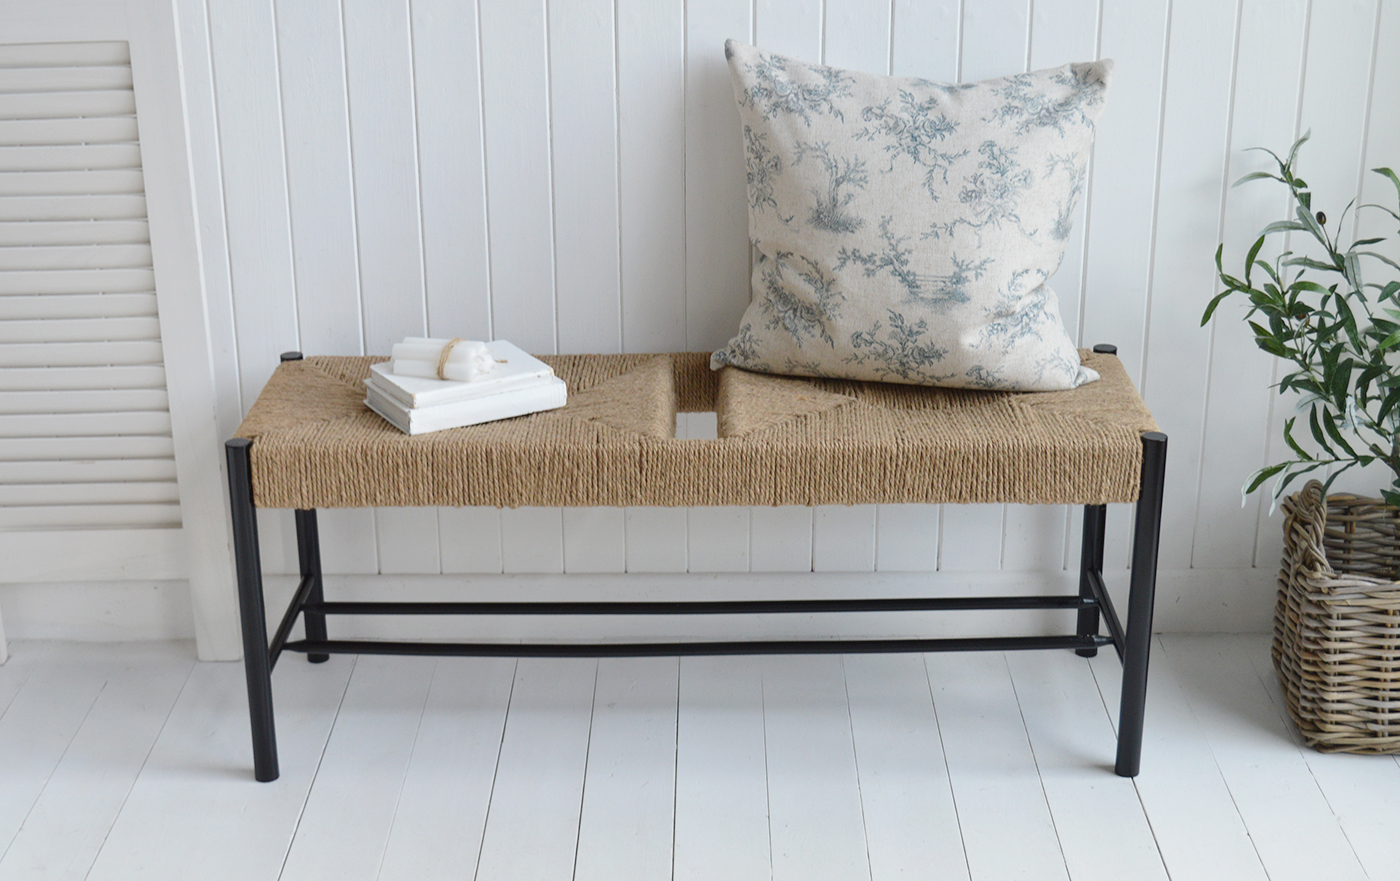 The black Wakefield bedroom bench for modern farmhouse interiors, such a versatile piece of furniture